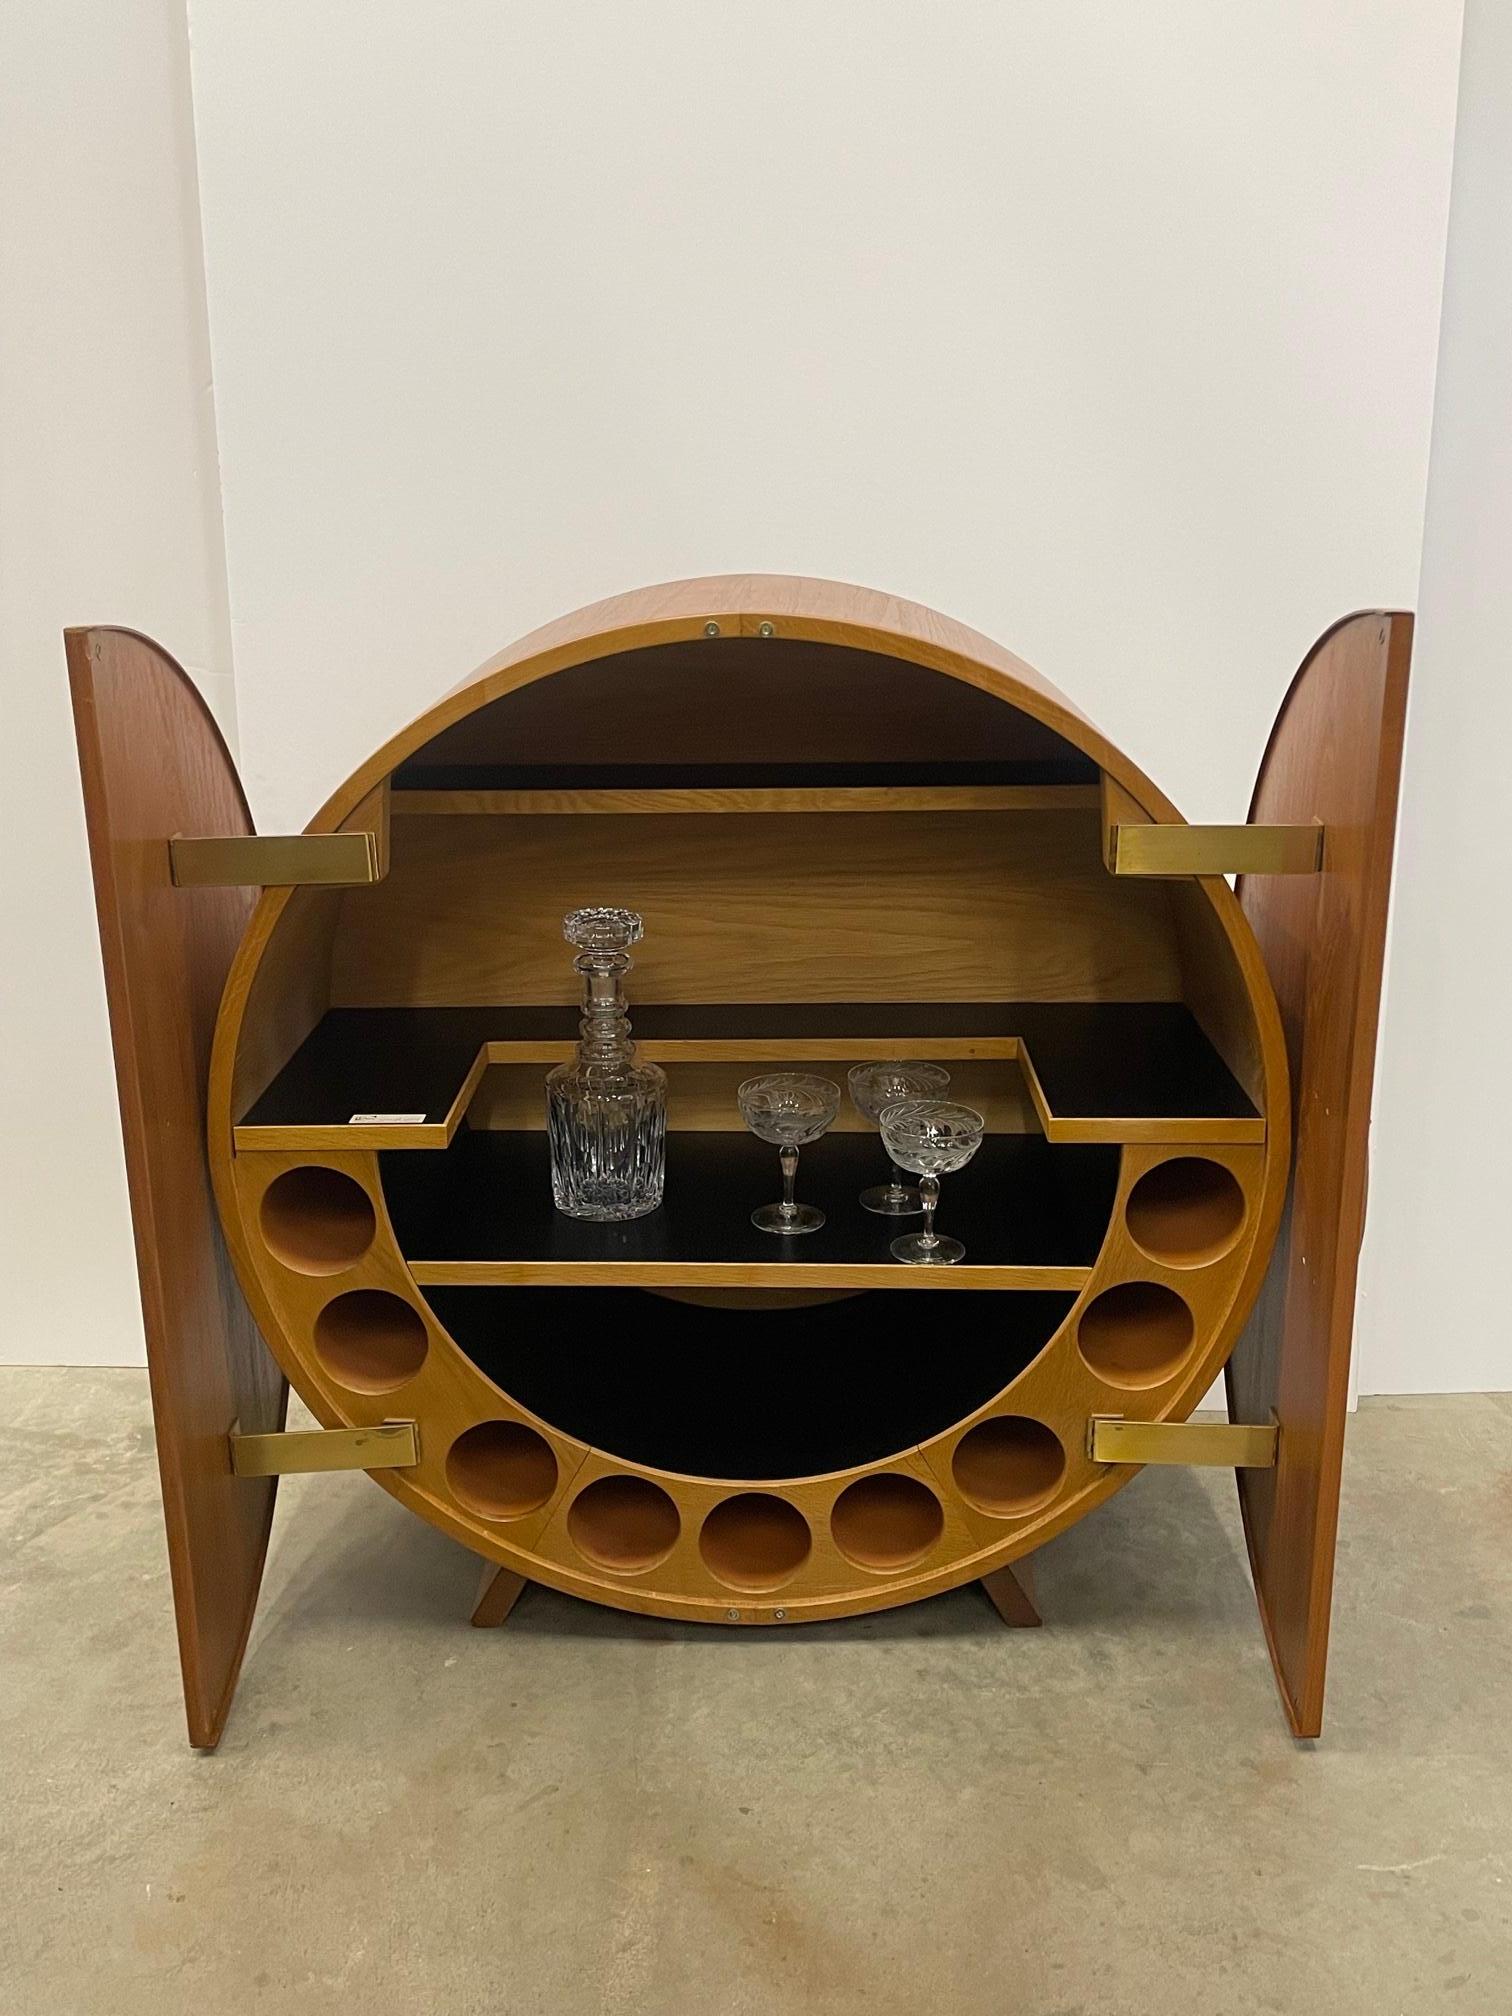 Ingenious teak Danish Mid-Century Modern disc shaped round dry bar having doors that pivot to the sides of the cabinet and reveal a fabulously outfitted interior bar with laminate shelves and places for bottles or glasses. There are brass hinges and